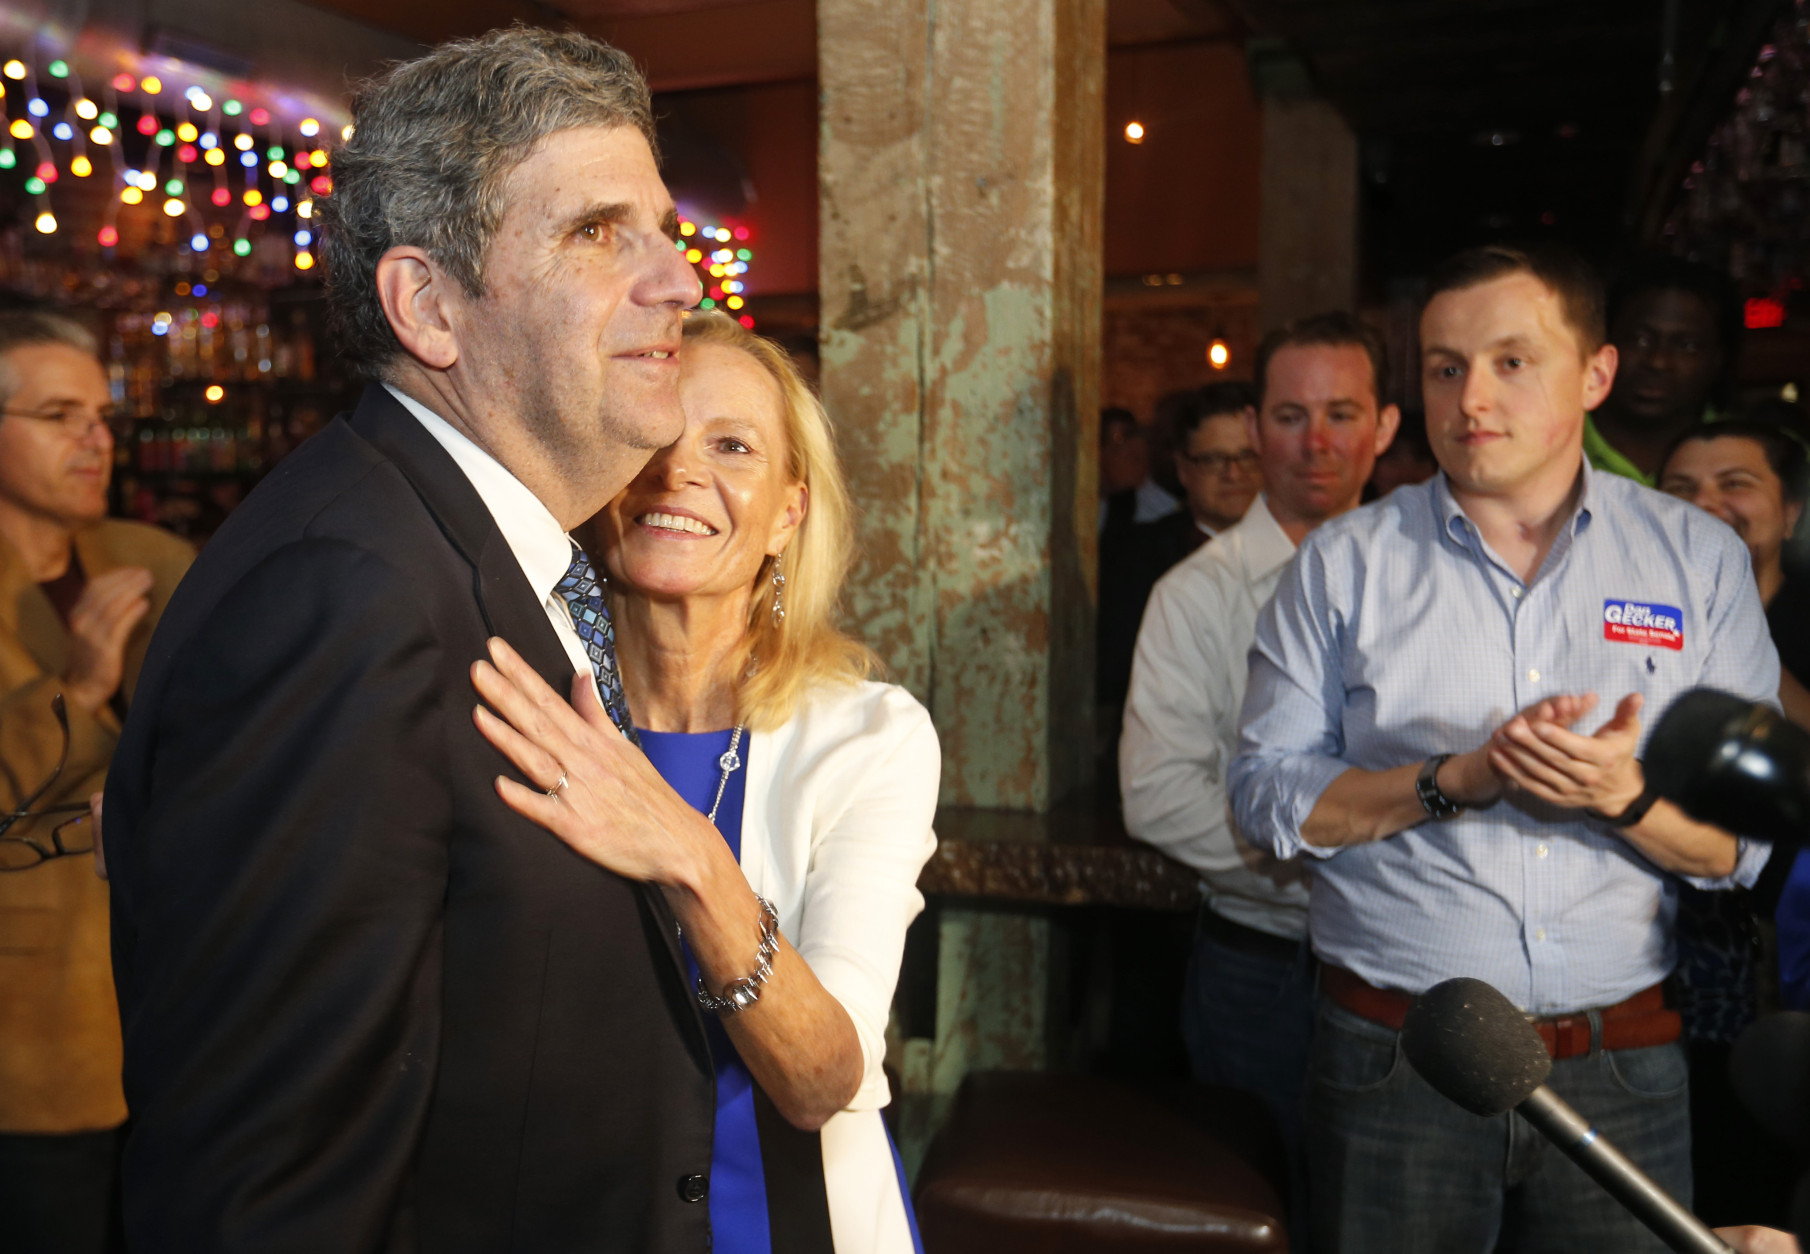 Democrat Dan Gecker gets a hug form his wife, Liz, as he speaks to a crowd of supporters at an election party in Richmond, Va., Tuesday, Nov. 3, 2015. Republican Glen Sturtevant narrowly defeated Gecker to hold a seat currently held by retiring GOP Sen. John Watkins. (AP Photo/Steve Helber)